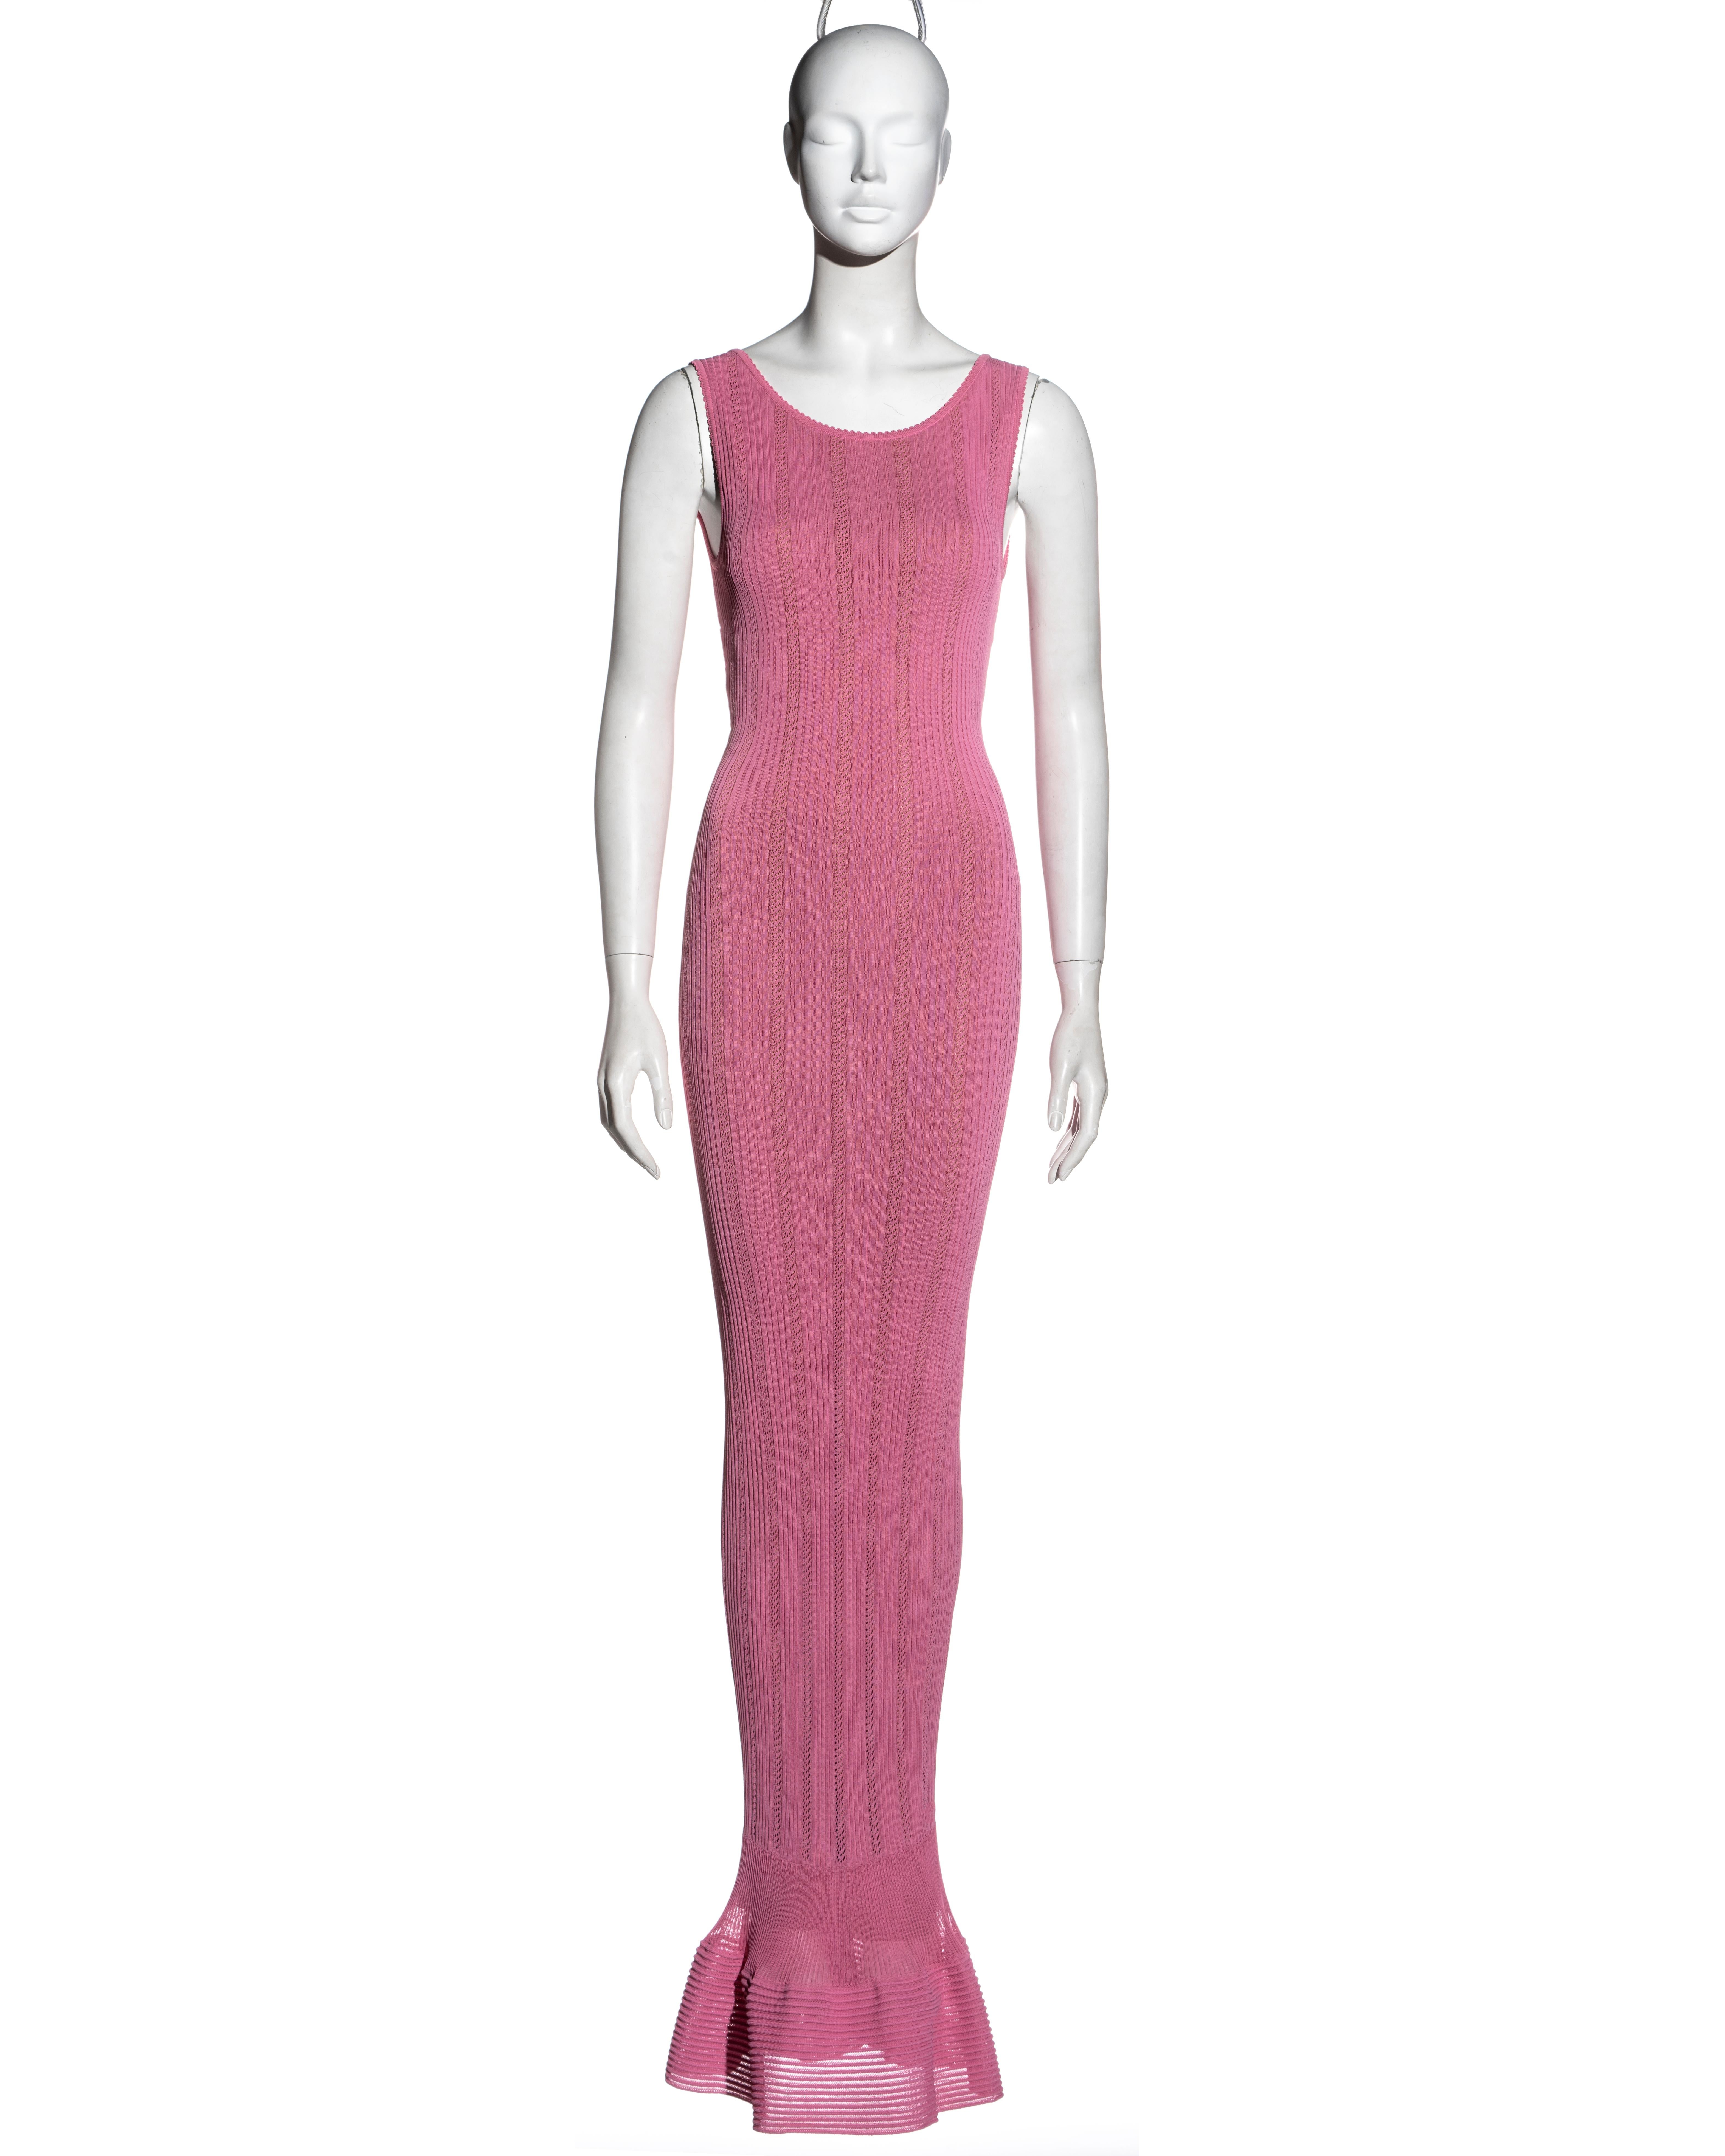 ▪ Azzedine Alaia pink rayon evening dress
▪ Stretch open-knit 
▪ Fishtail skirt 
▪ Figure hugging fit 
▪ Nude lining 
▪ Size 'XS'
▪ Spring-Summer 1996
▪ 100% Rayon
▪ Made in Italy